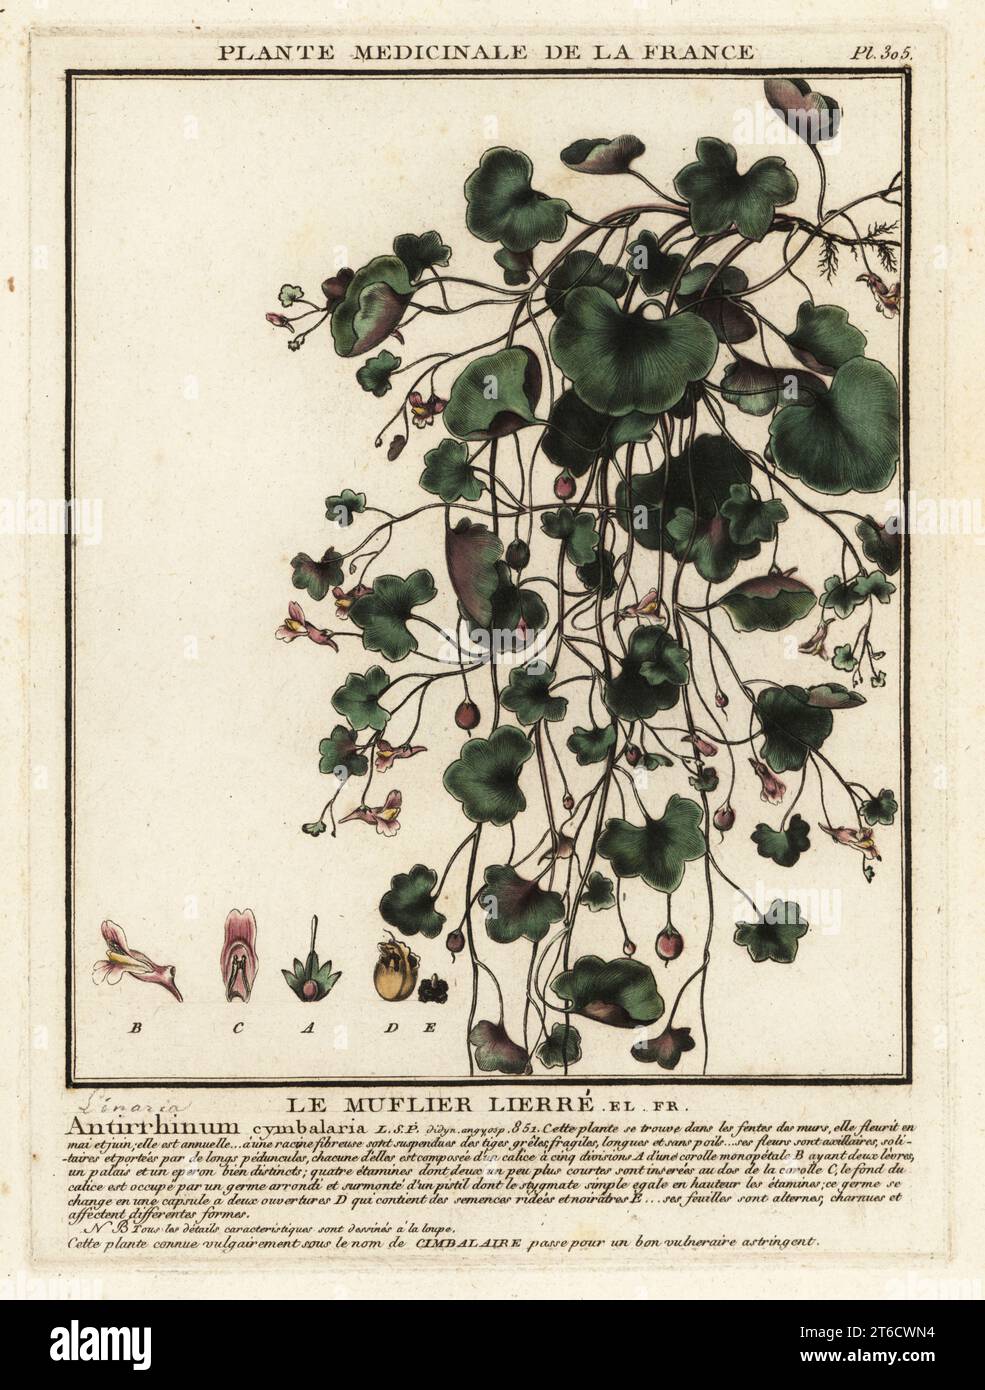 Ivy-leaved toadflax, Cymbalaria muralis. Le muflier lierre, Antirrhinum cymbalaria. Copperplate engraving printed in three colours by Pierre Bulliard from his Herbier de la France, ou collection complete des plantes indigenes de ce royaume, Didot jeune, Debure et Belin, 1780-1793. Stock Photo